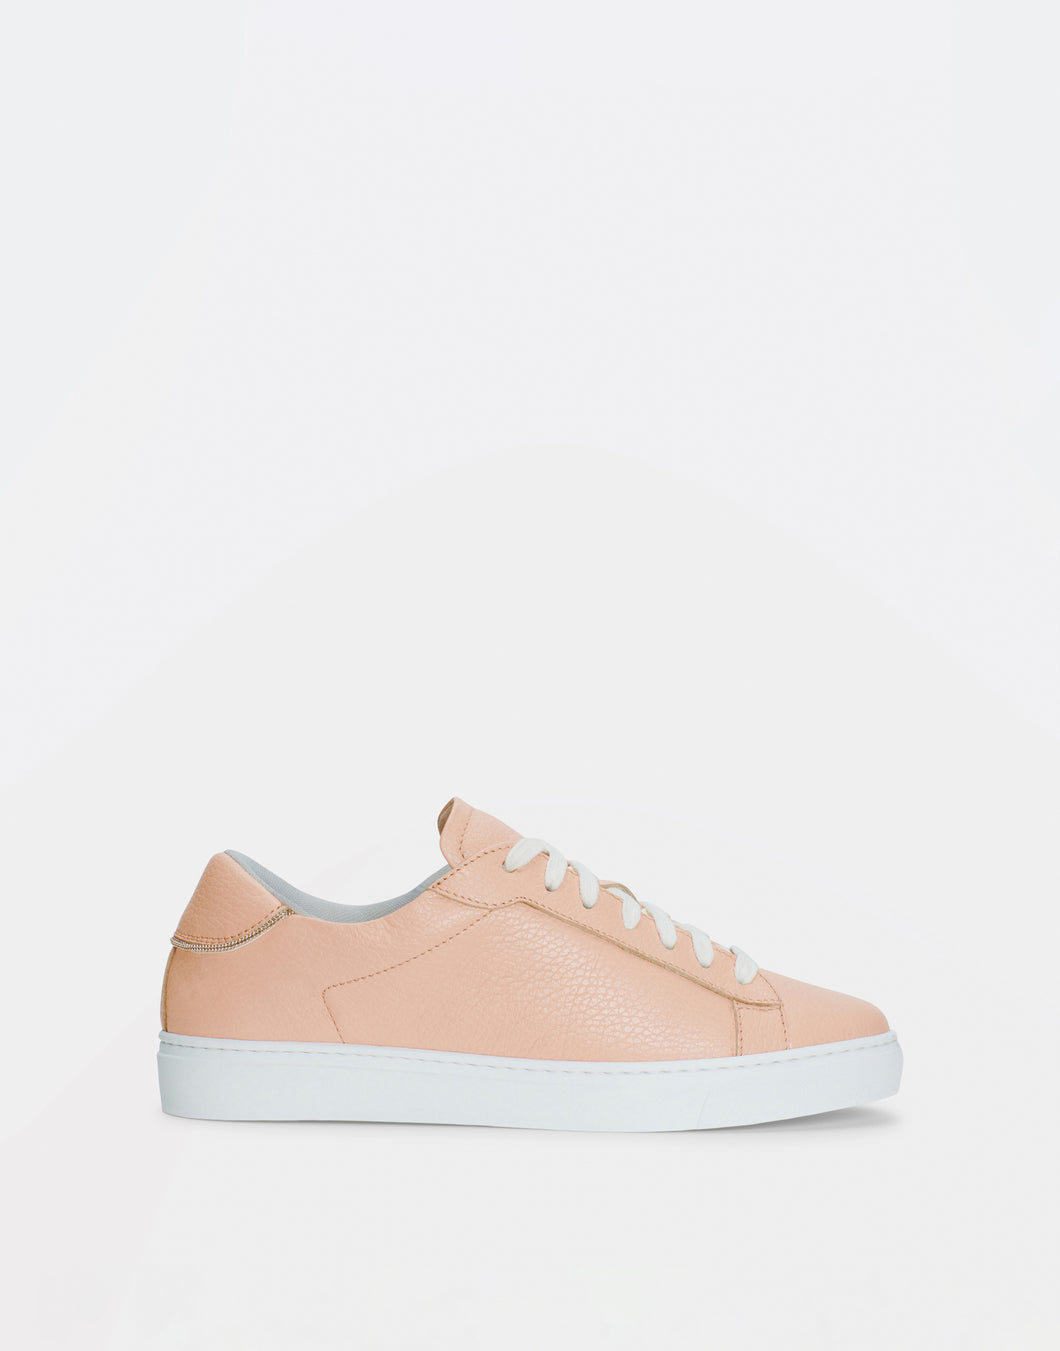 Dalila leather sneakers, dusty pink